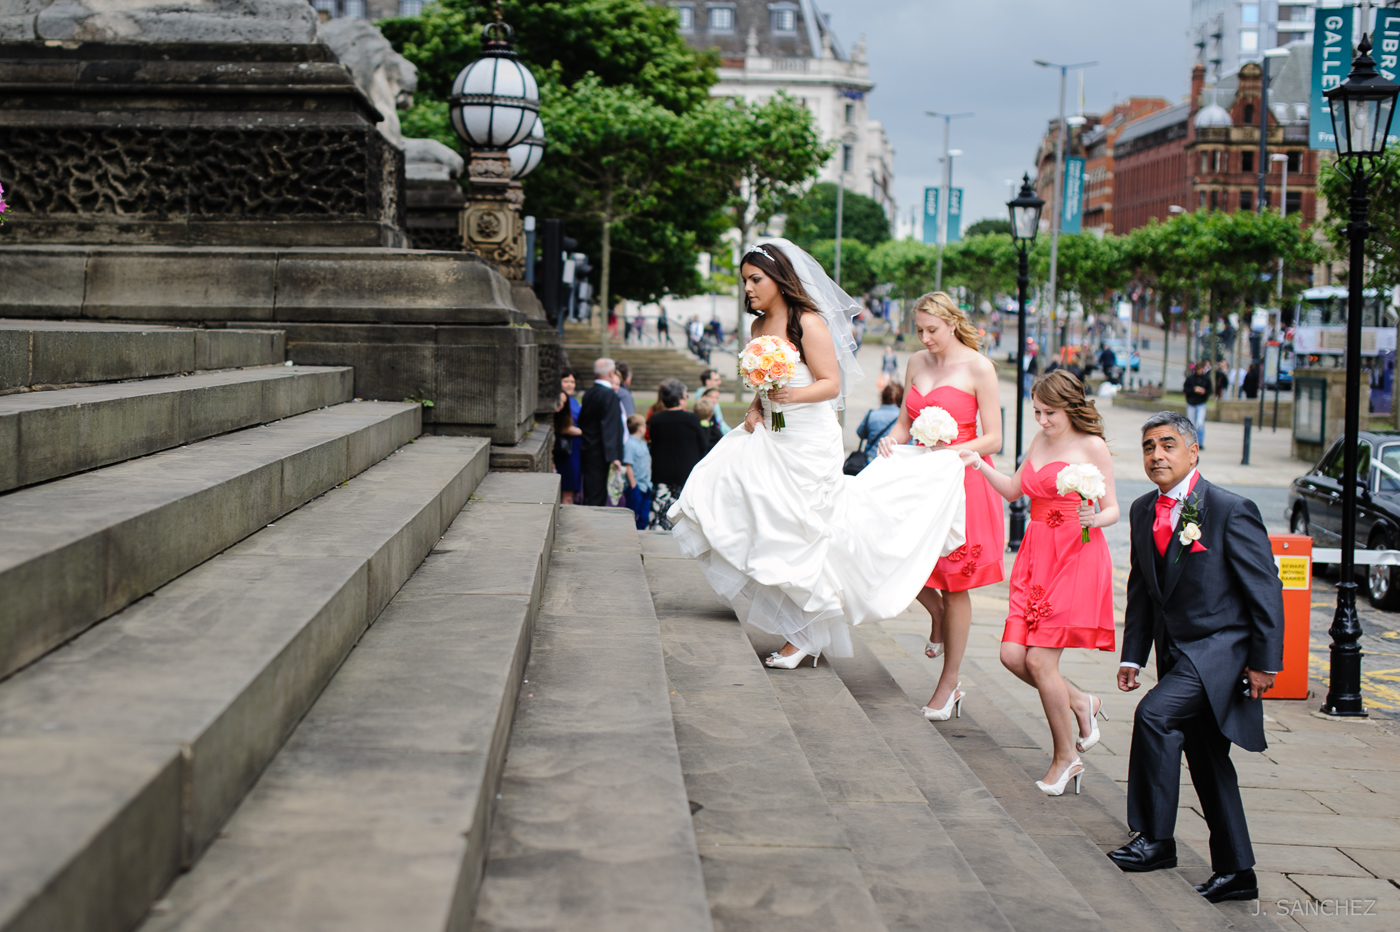 Wedding party arriving to the Leeds Town Hall.